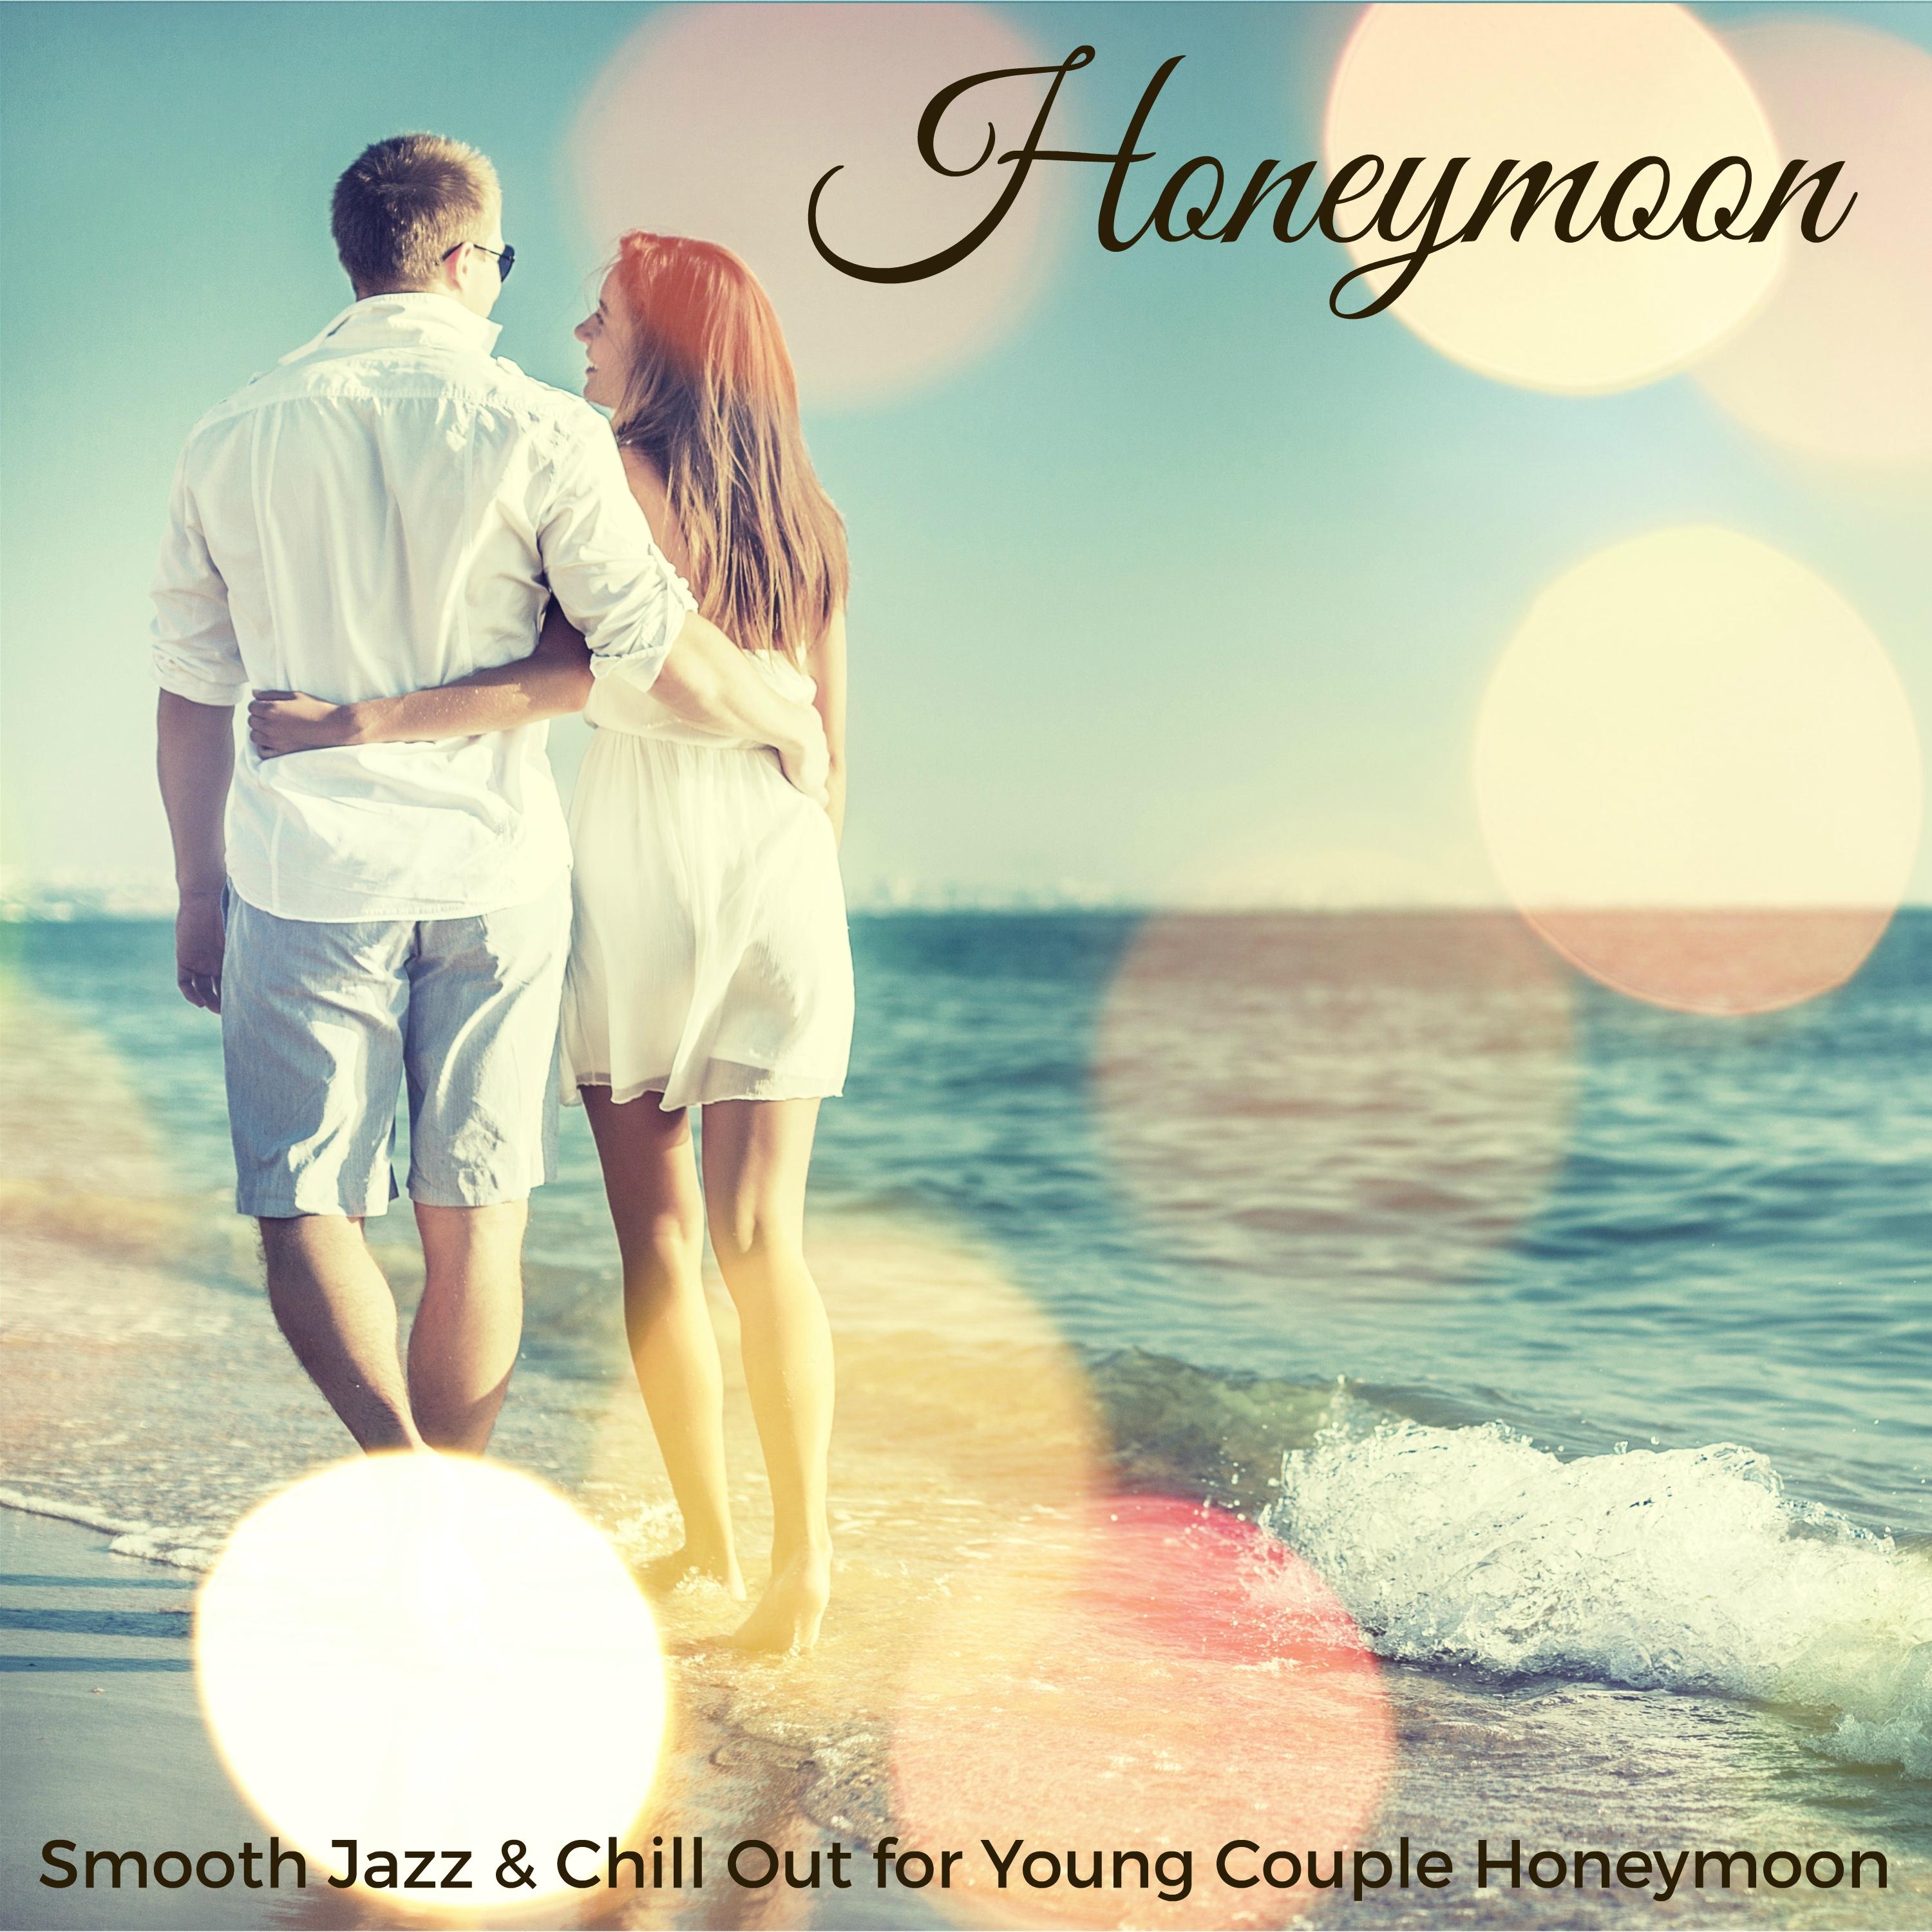 Honeymoon – Smooth Jazz & Chill Out for Young Couple Honeymoon